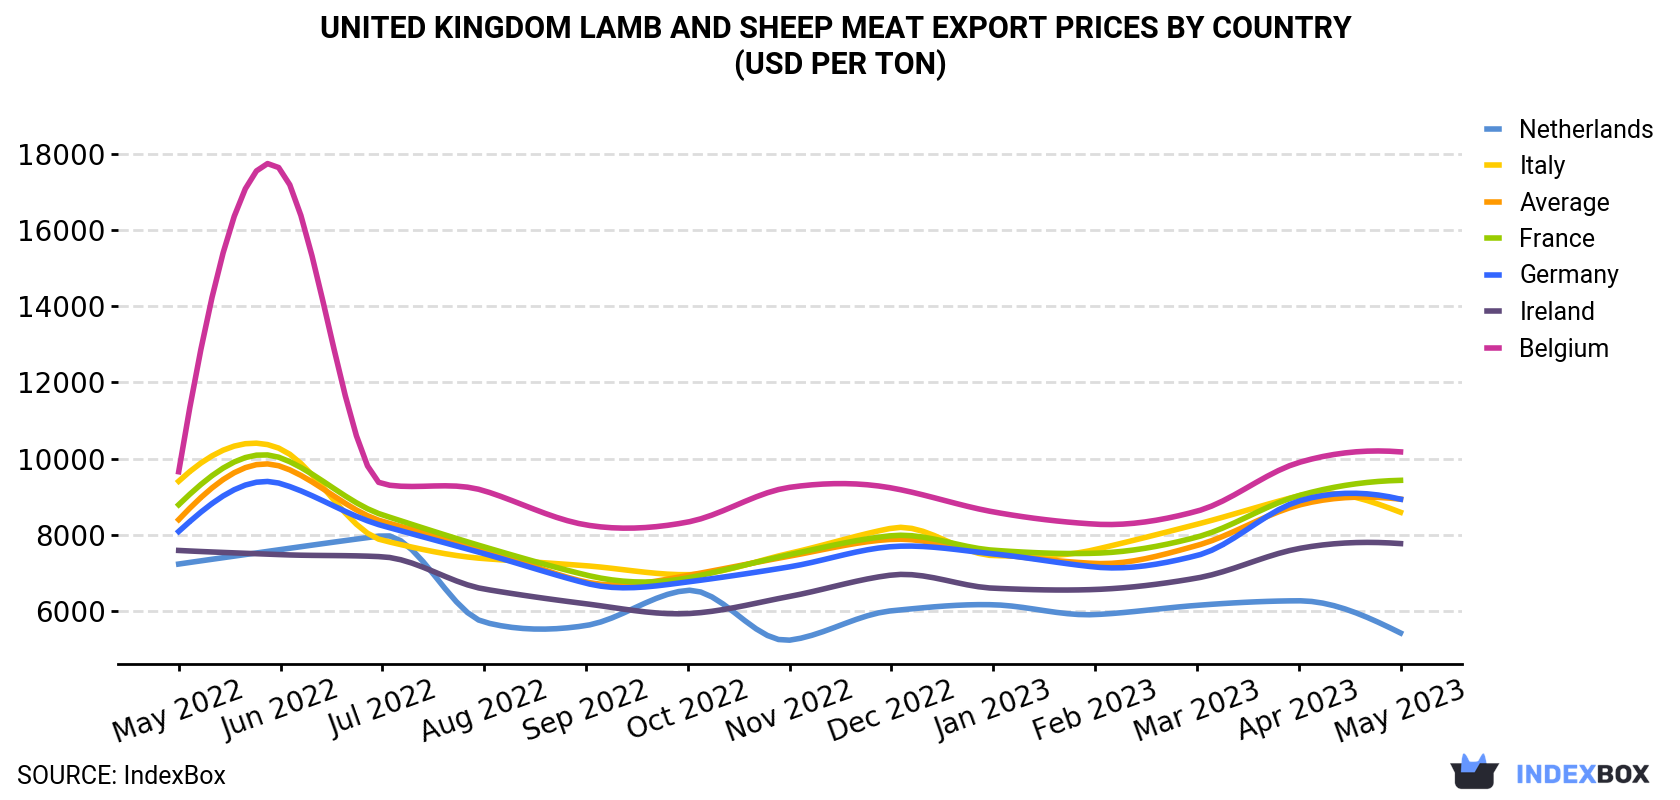 United Kingdom Lamb and Sheep Meat Export Prices By Country (USD Per Ton)